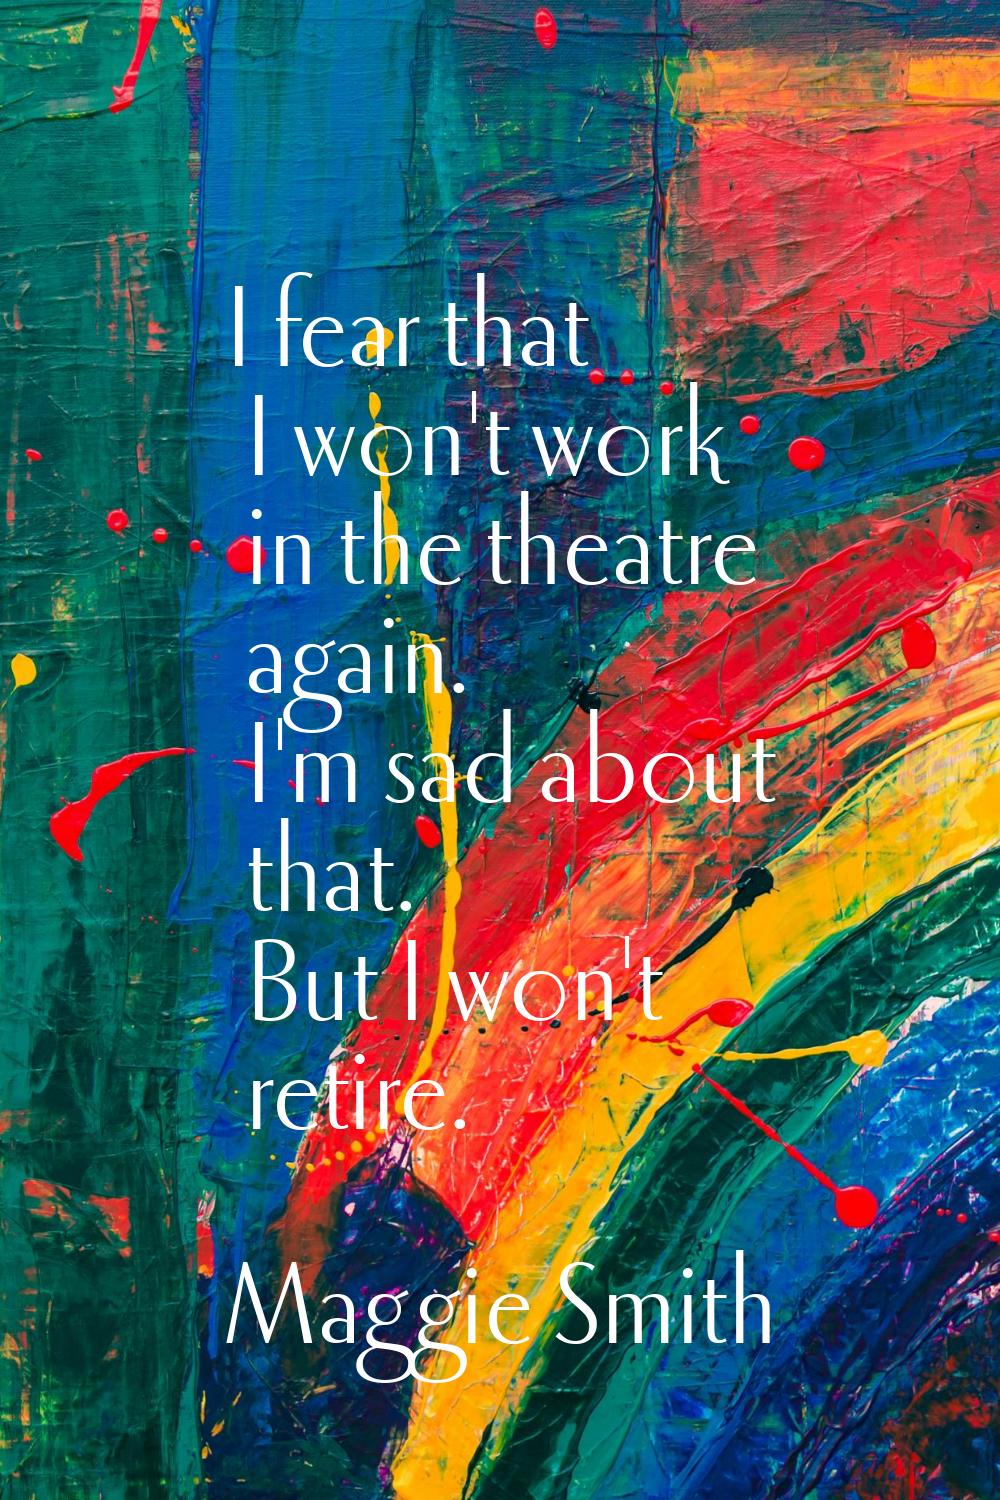 I fear that I won't work in the theatre again. I'm sad about that. But I won't retire.